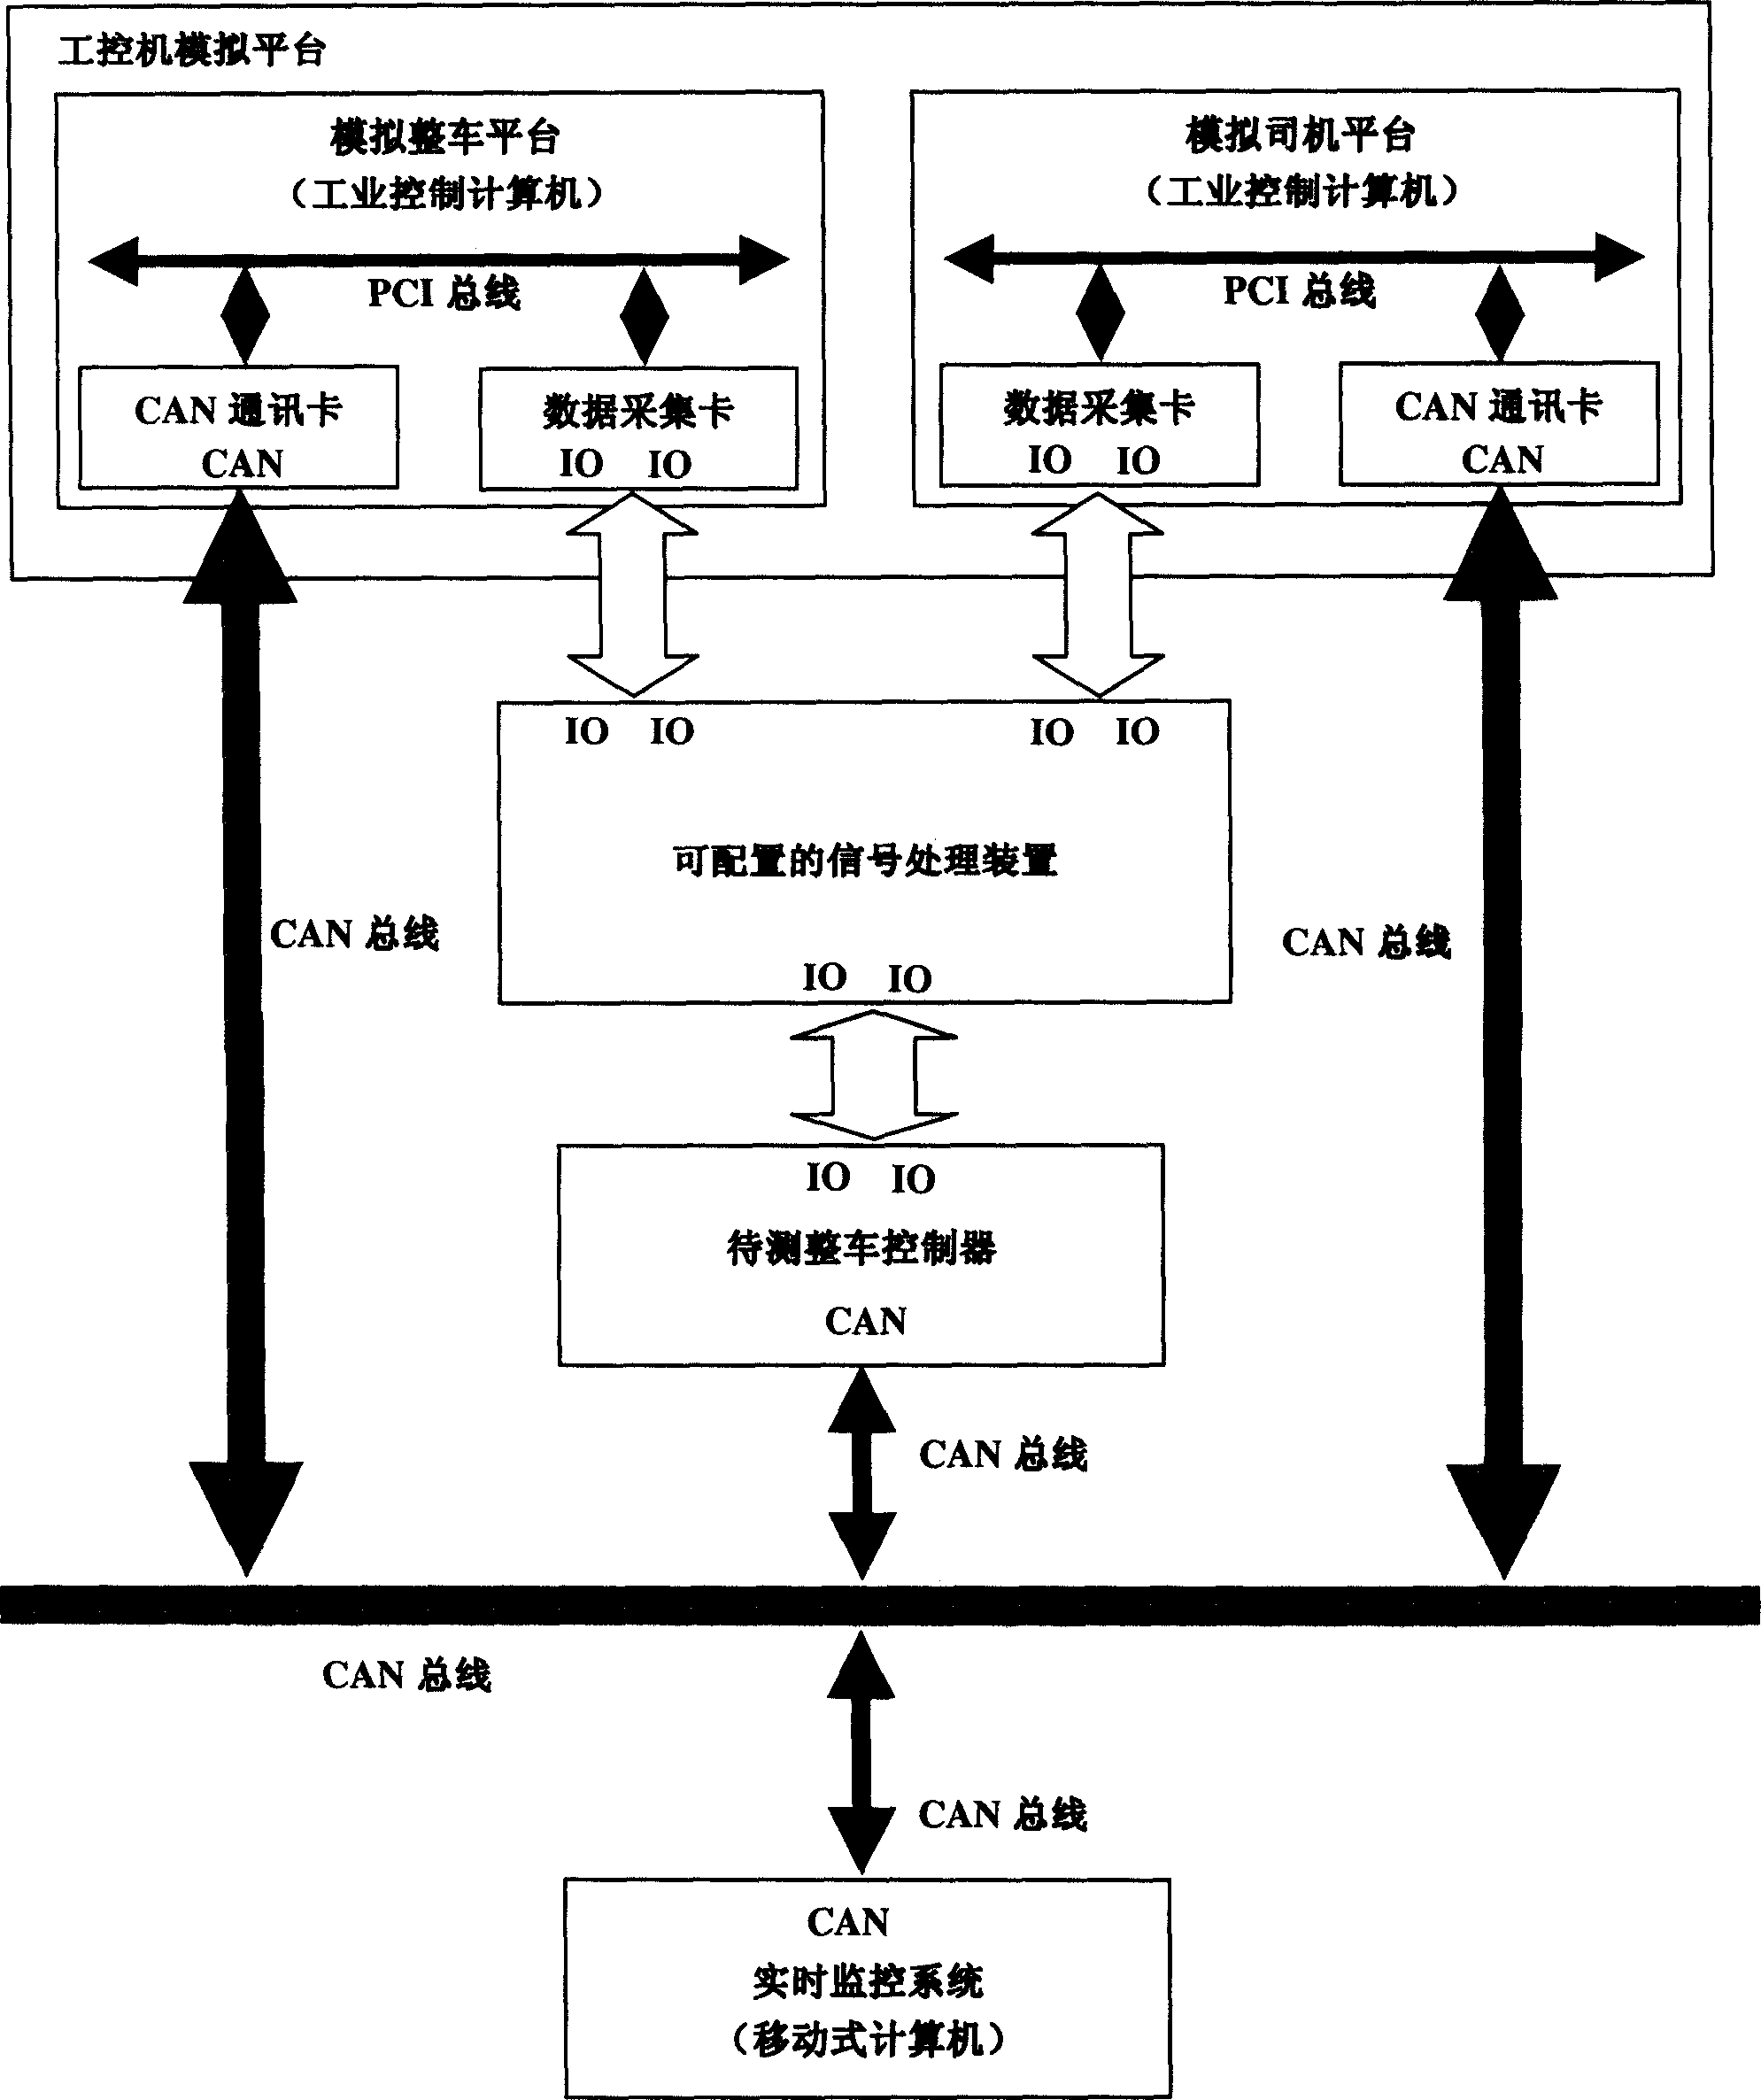 Simulated measuring system for whole vehicle controller